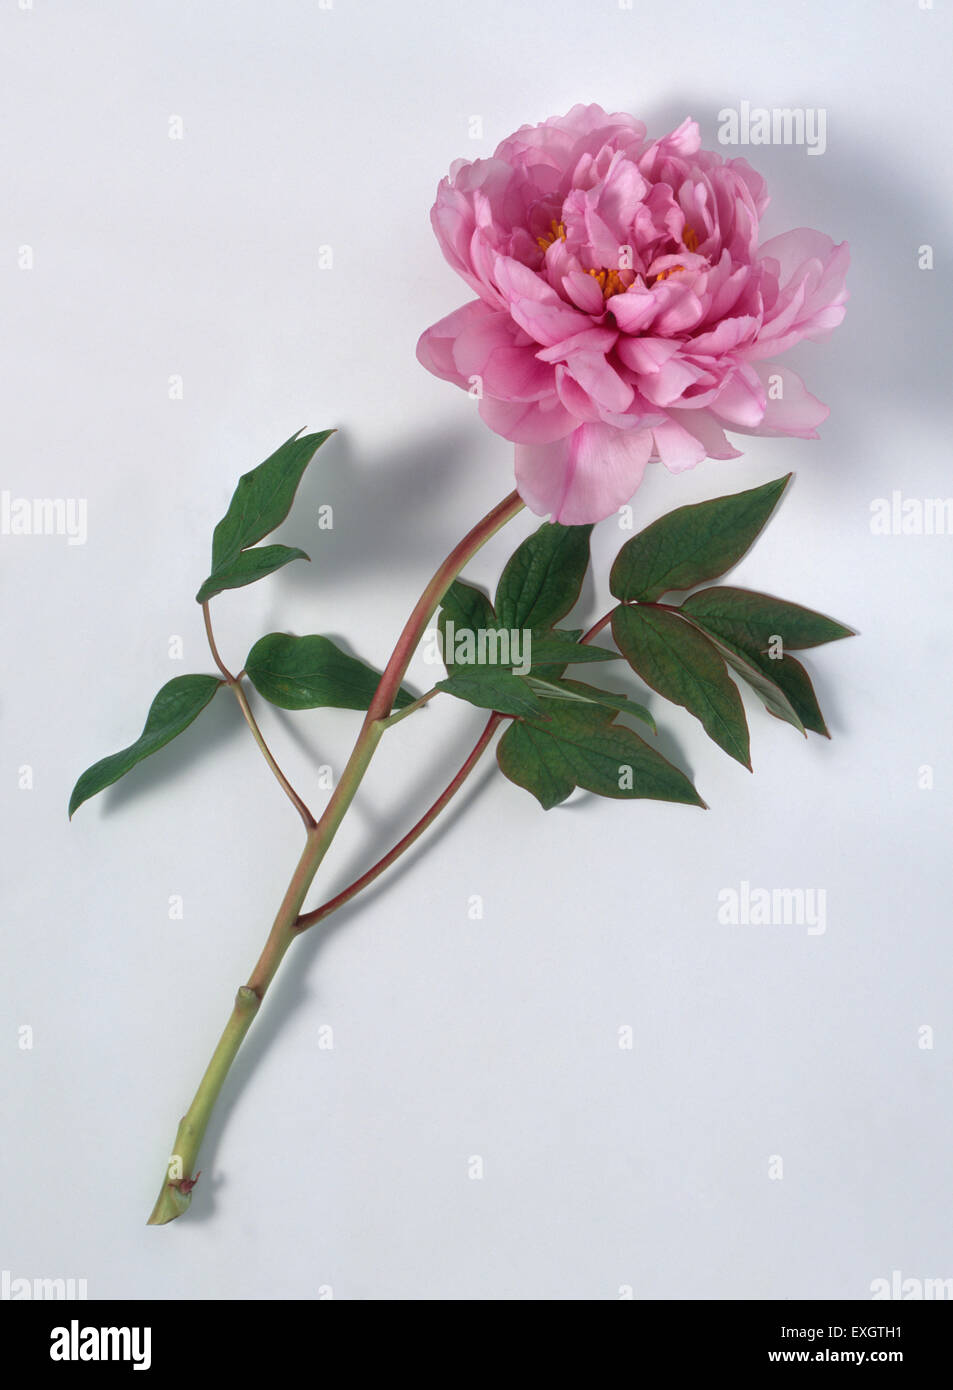 Pink peony with green leaves on long stem Stock Photo